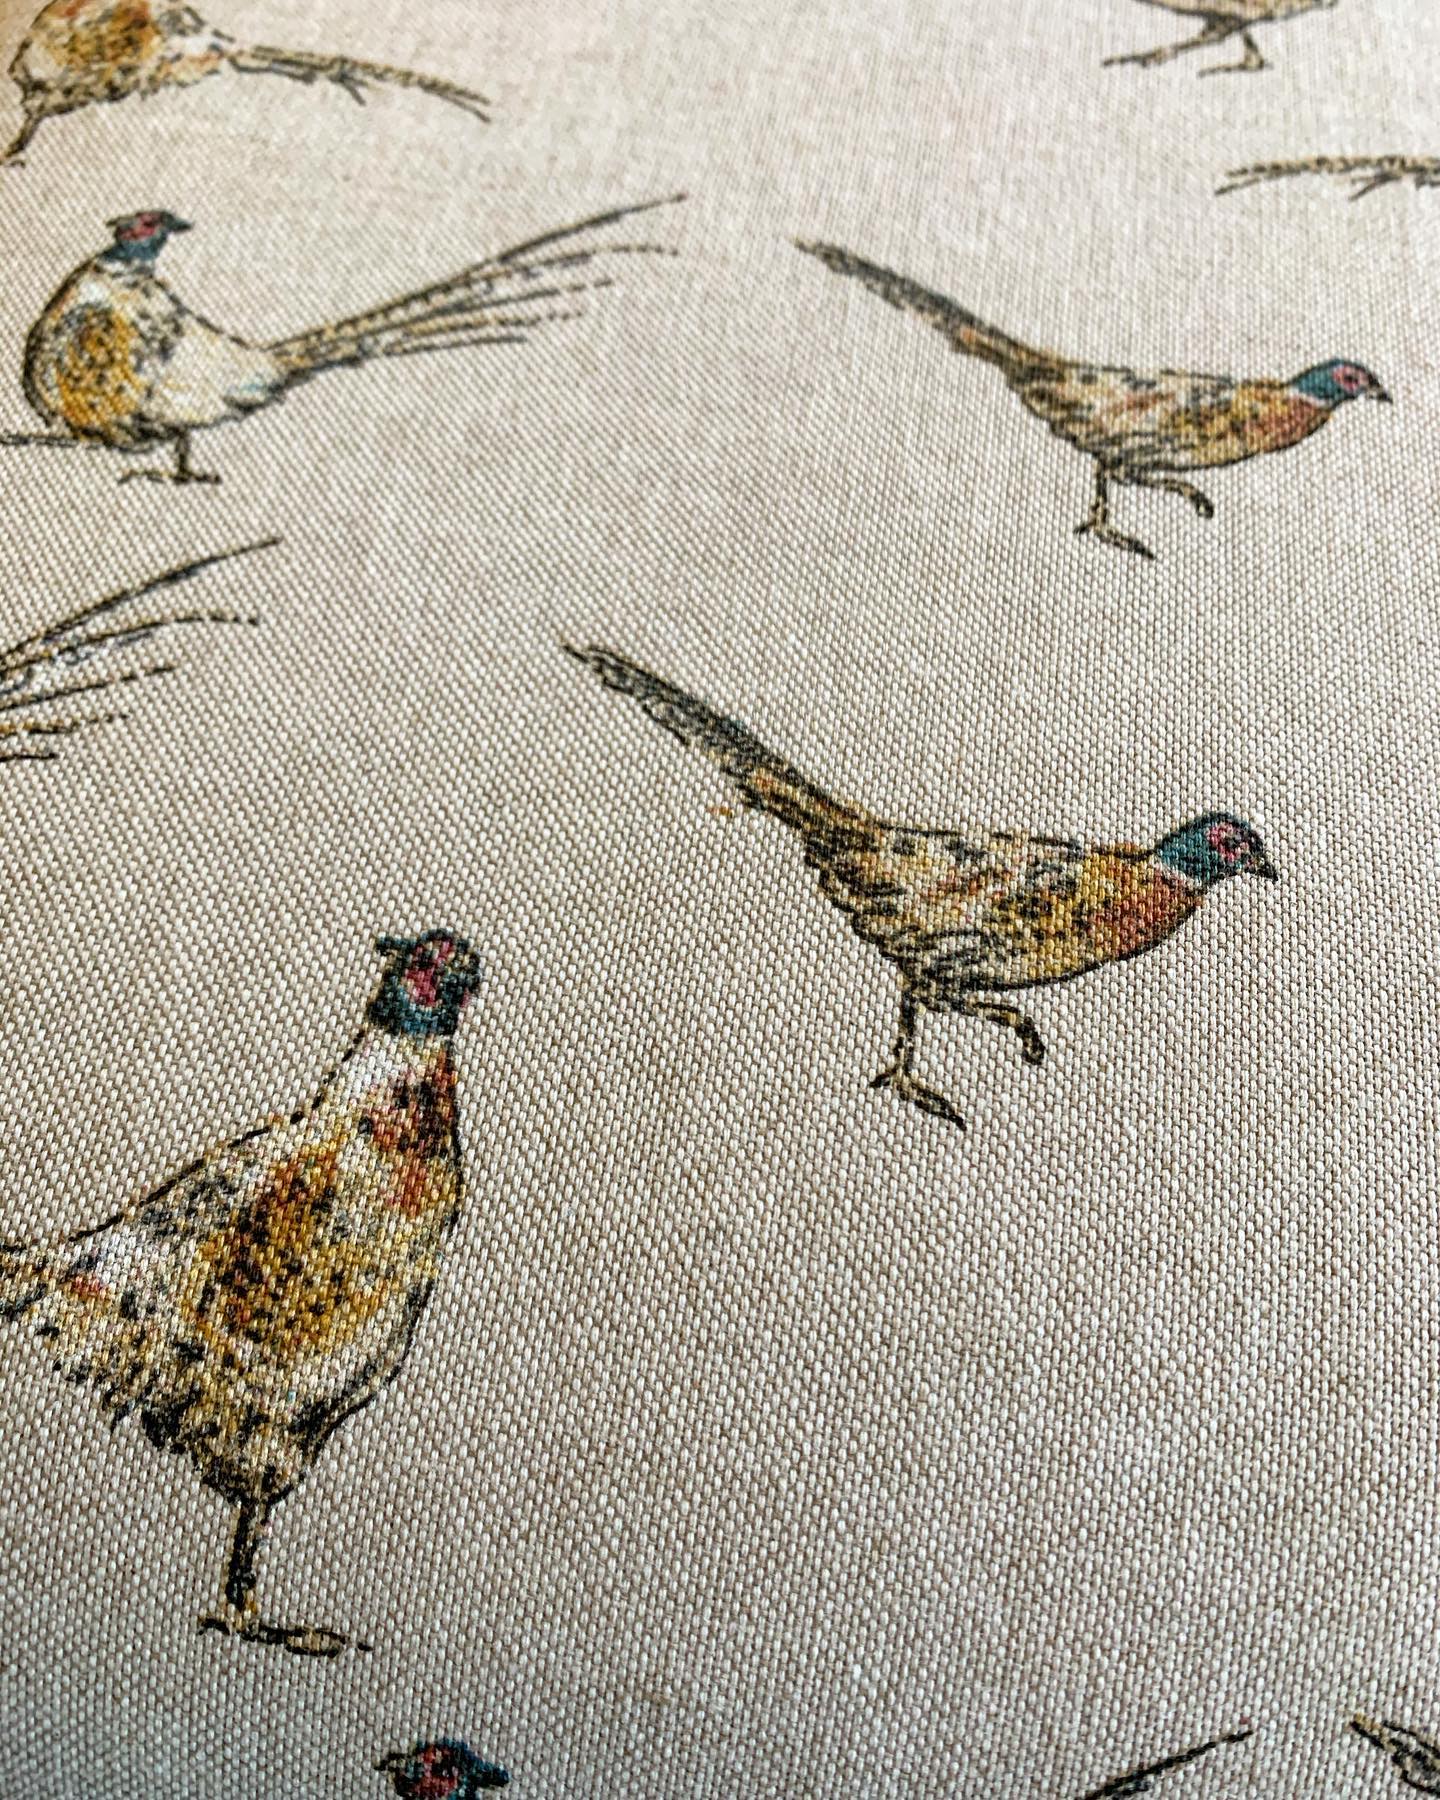 Working with this gorgeous pheasant fabric today, ready for an order that’ll be heading to one of our favourite local shops. #countrycottageinteriors #lifestyle #handcrafted #homewares #homedecor #pheasant #gamebirds #illustration #countrythemed #rustic #wiltshire